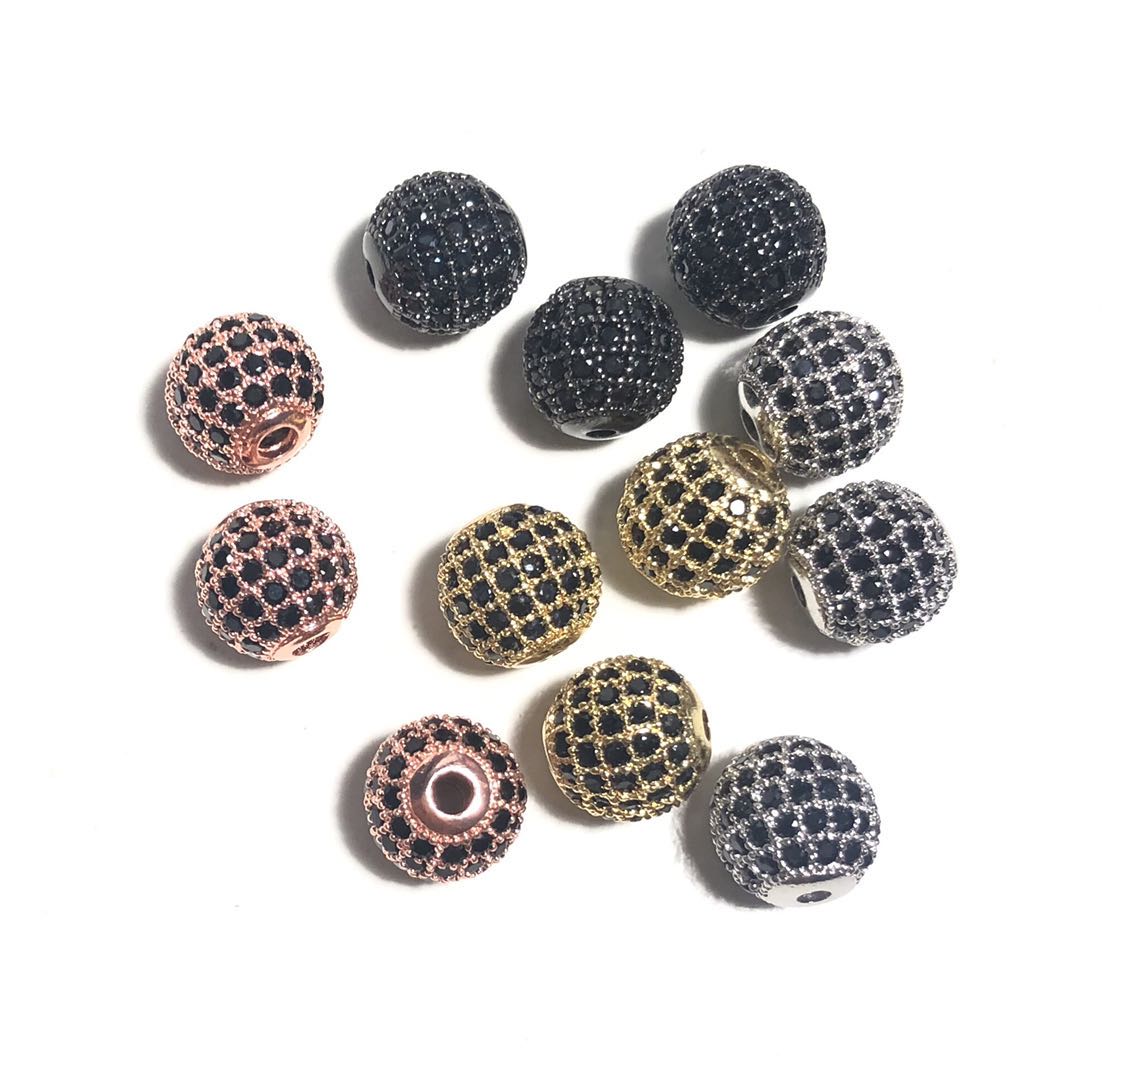 50pcs/lot 8mm Black CZ Paved Ball Spacers Mix Color Wholesale Charms Beads Beyond